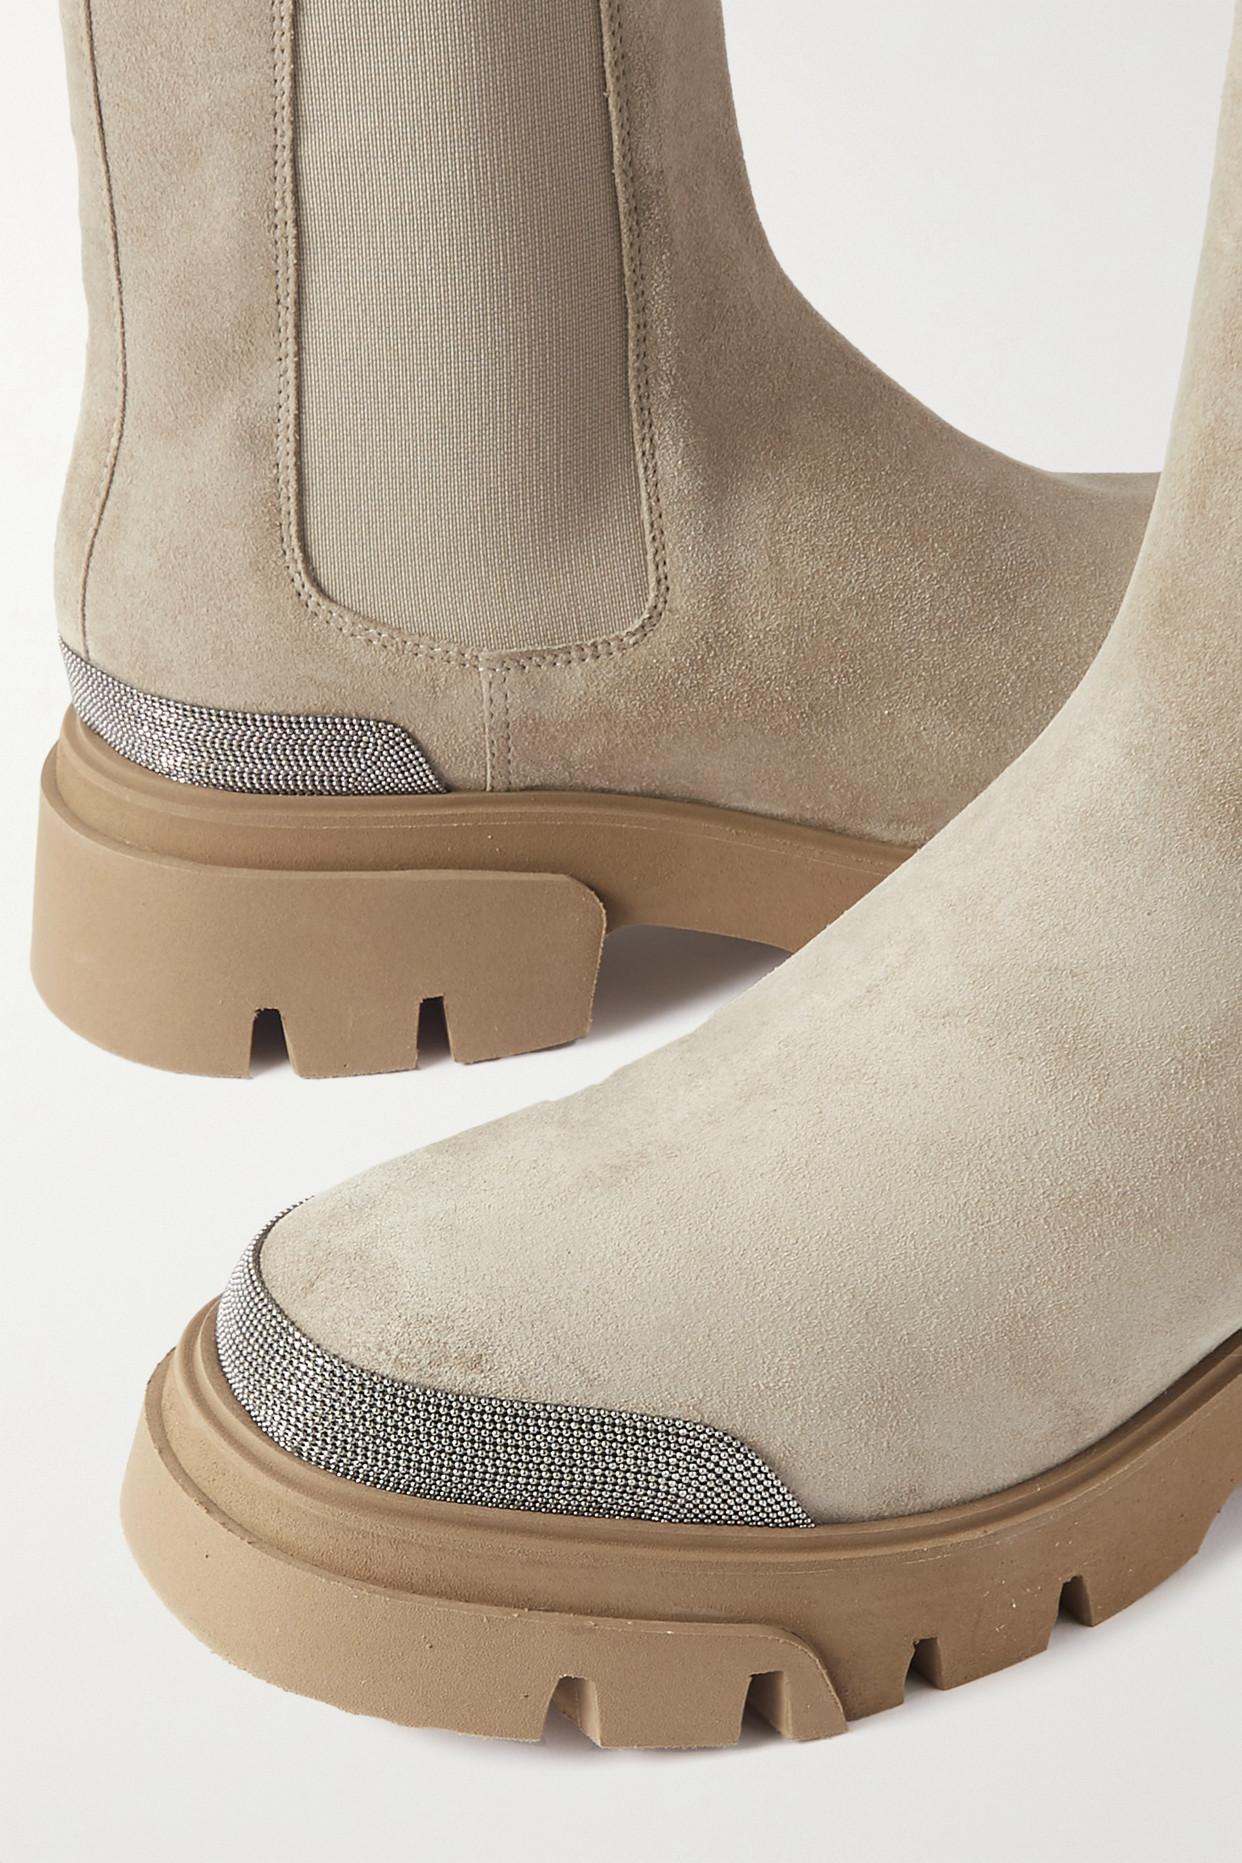 Brunello Cucinelli Bead-embellished Suede Chelsea Boots in Natural | Lyst